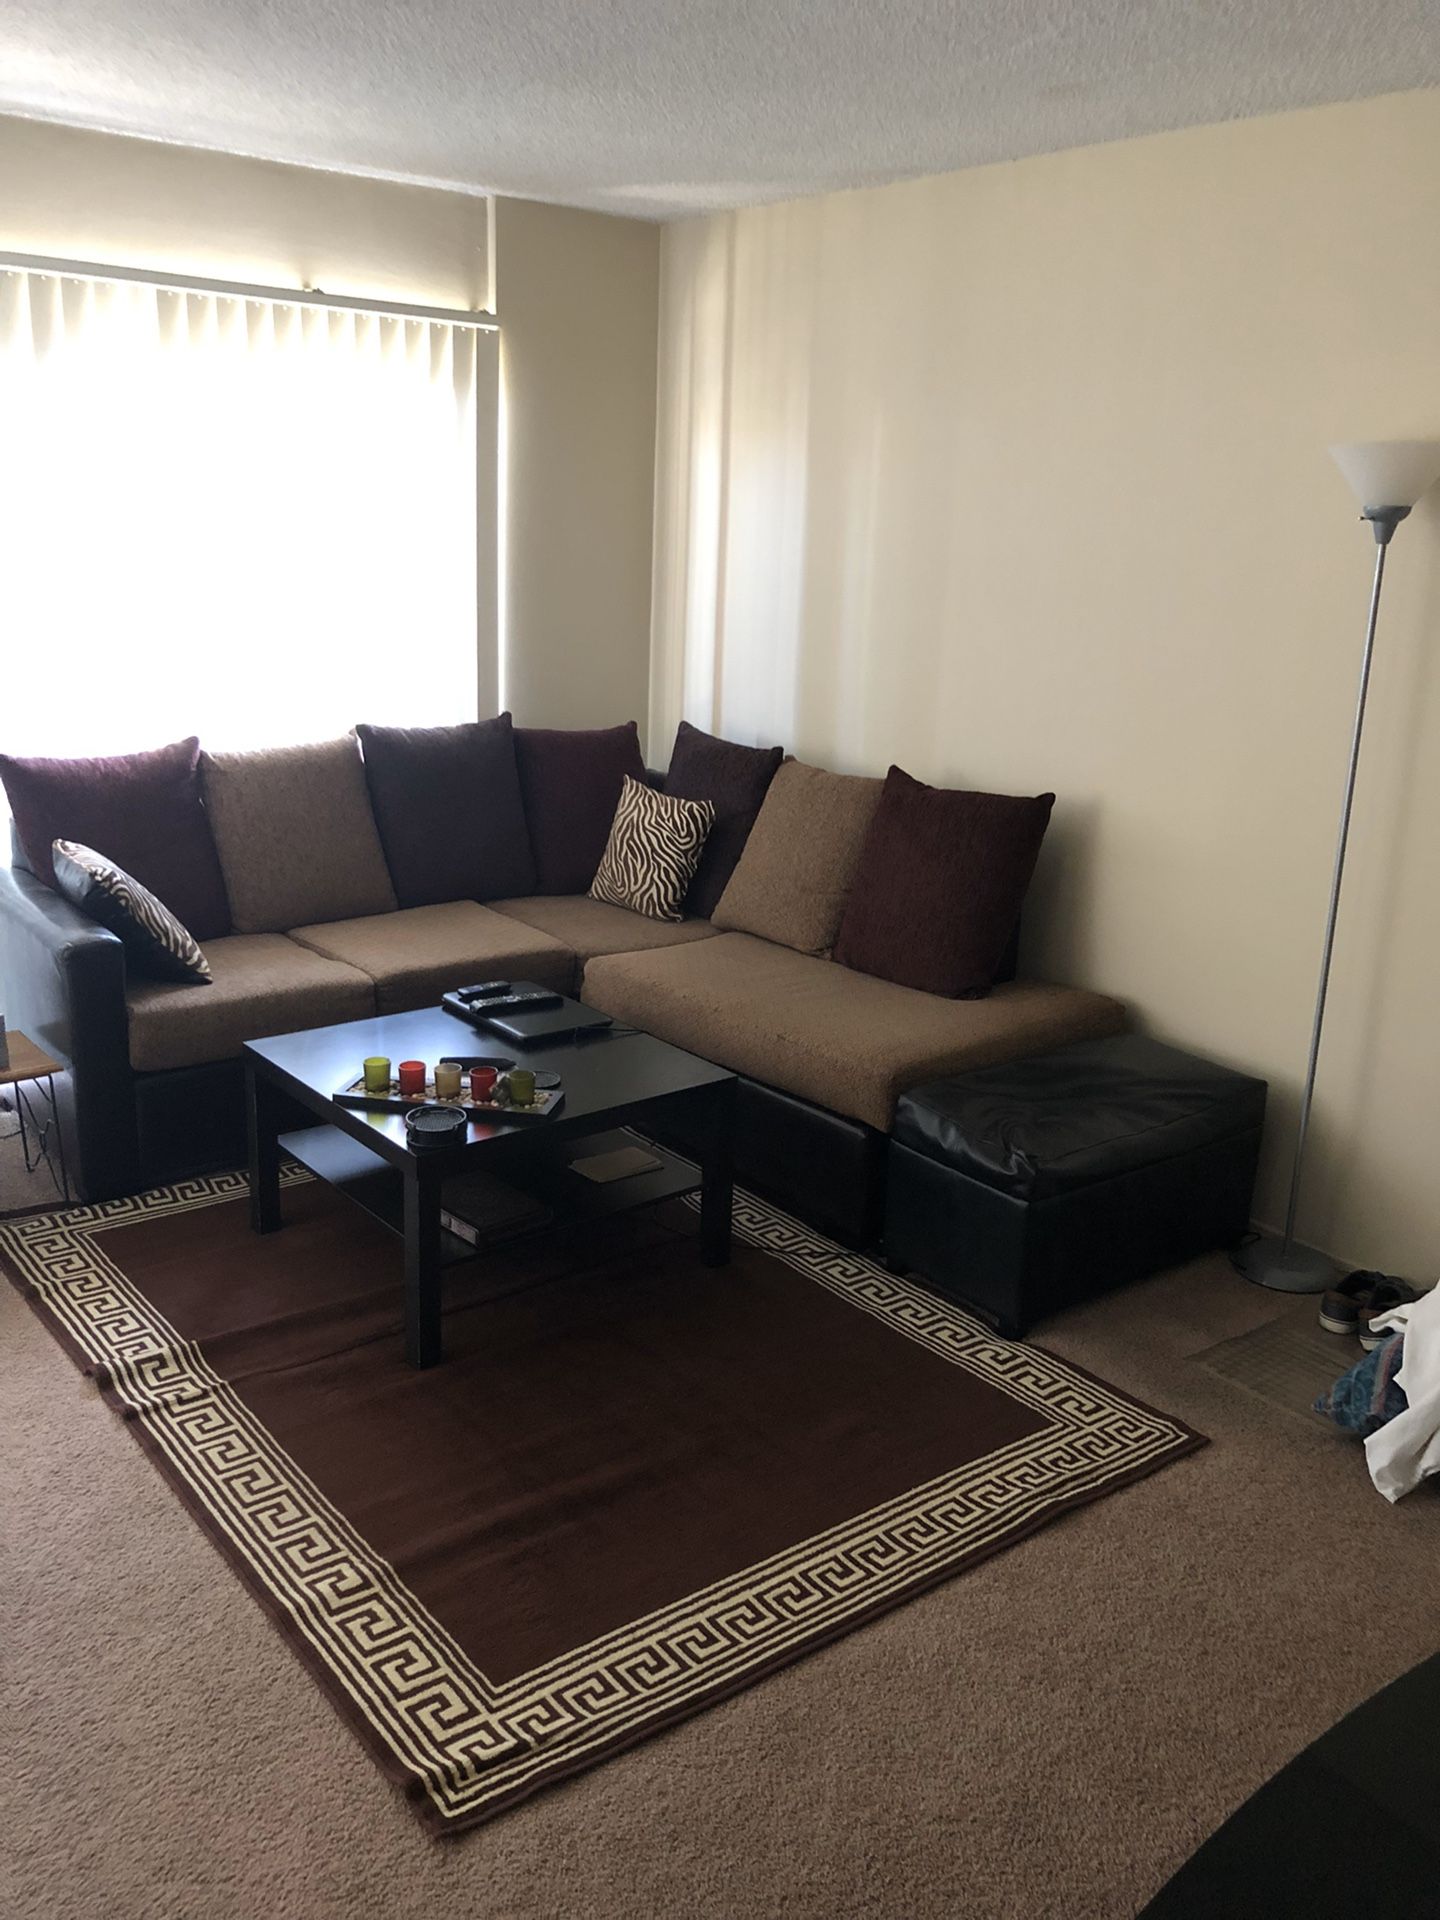 Sectional couch and coffee table with carpet